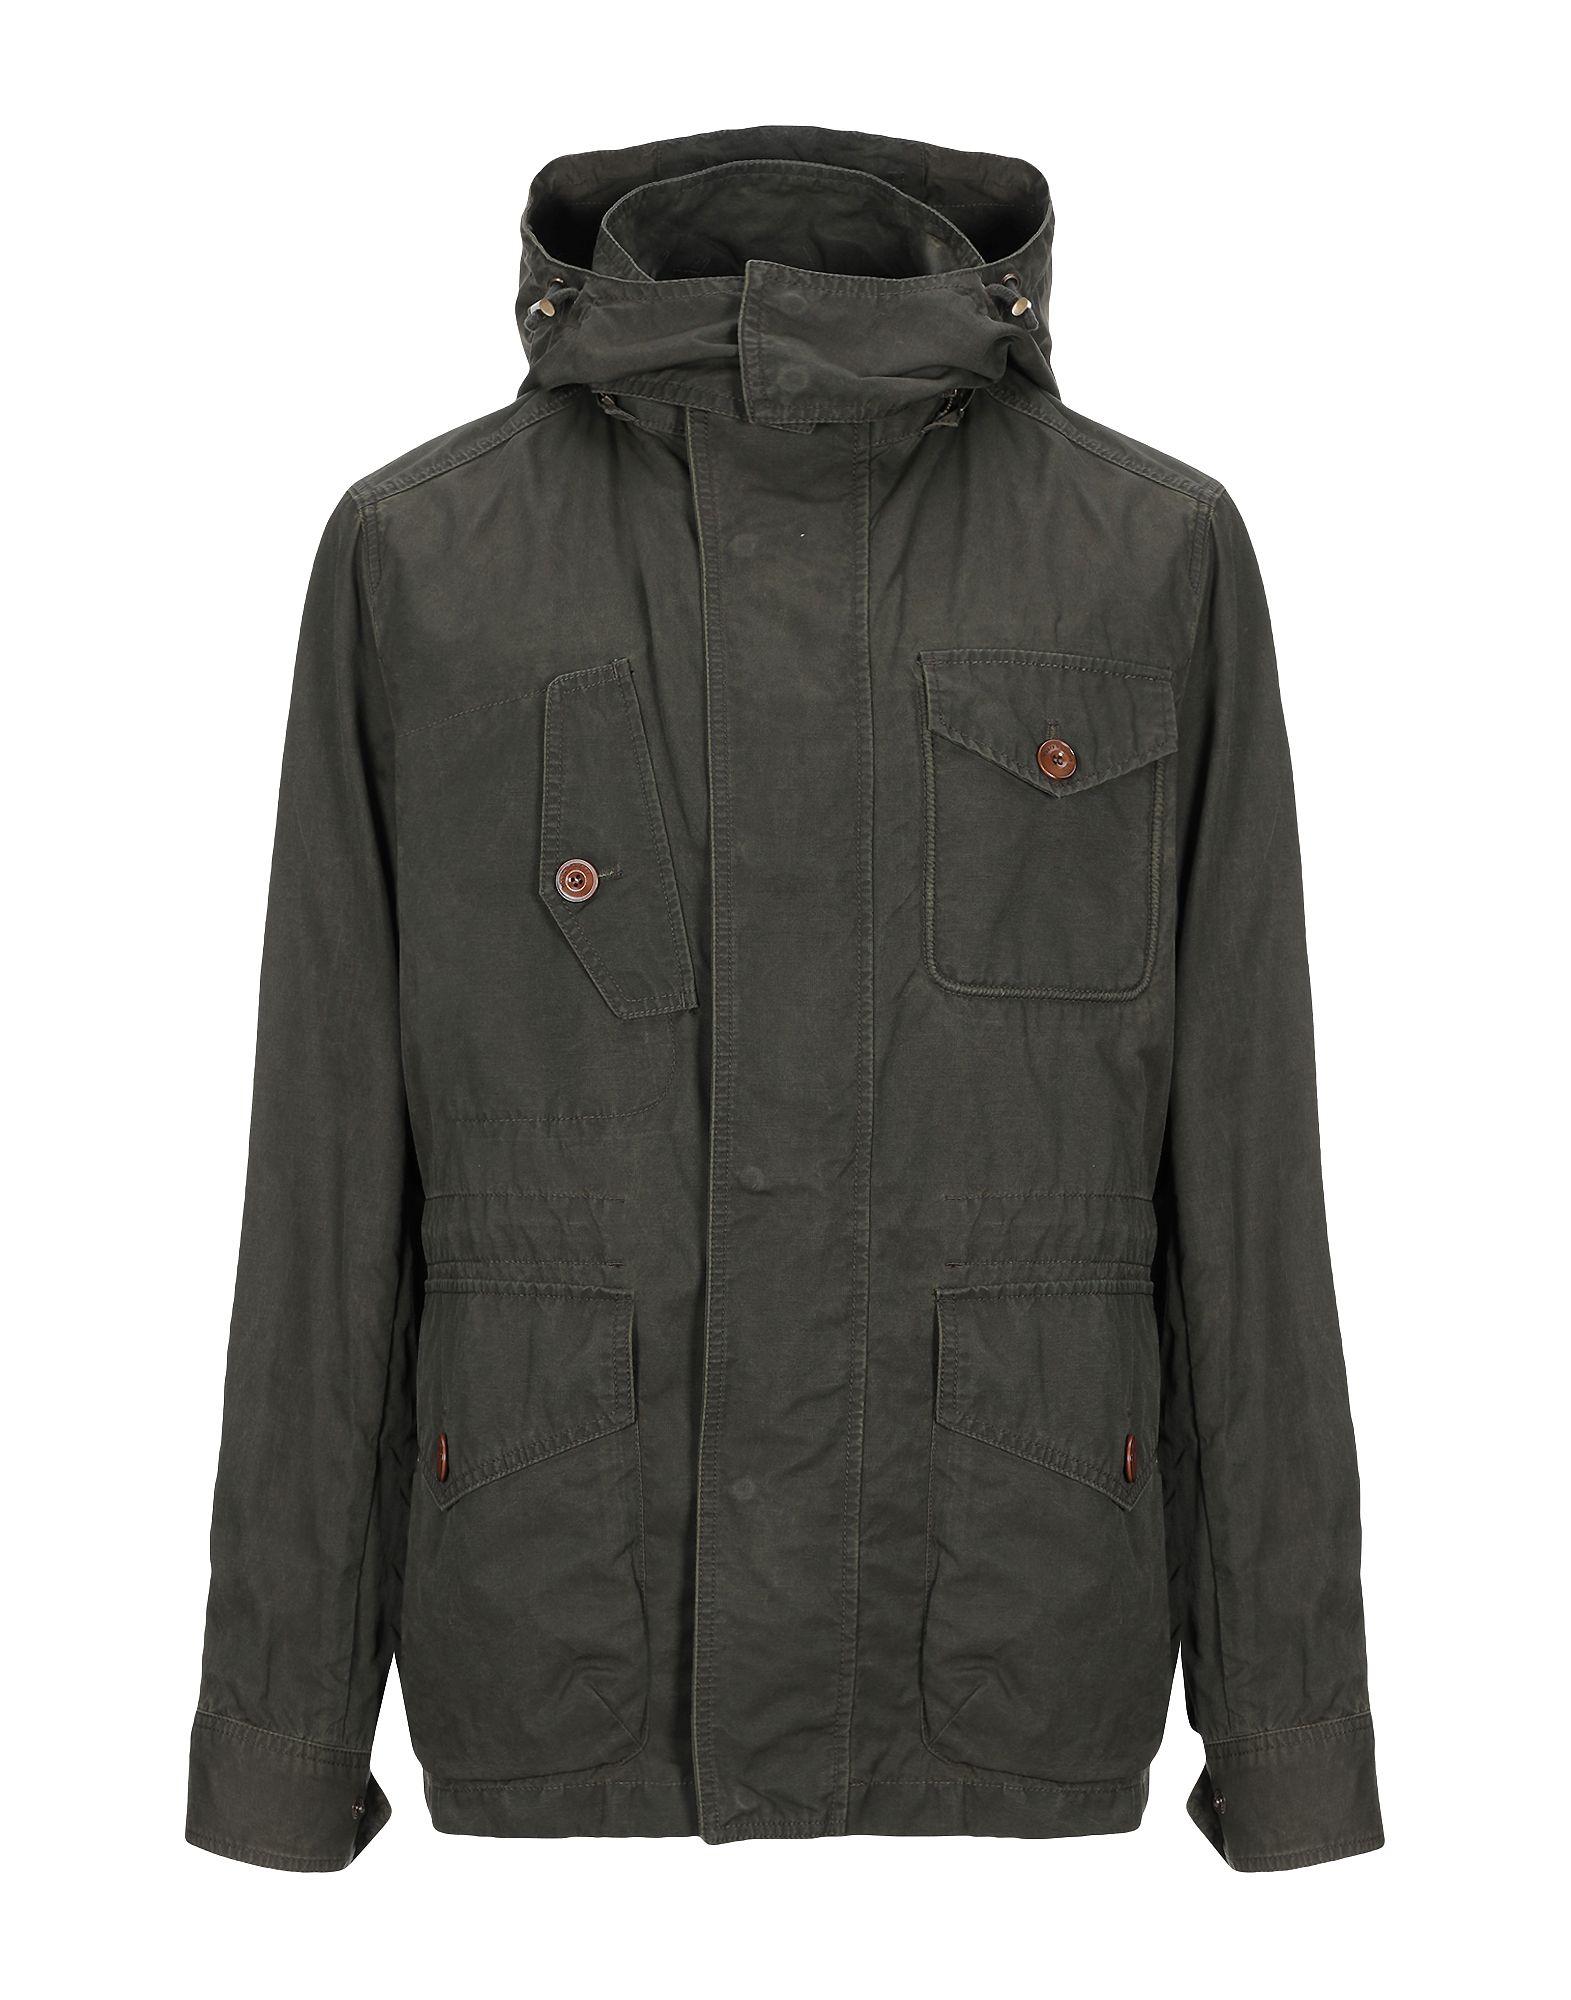 Henry Cotton's Cotton Jacket in Military Green (Green) for Men - Lyst